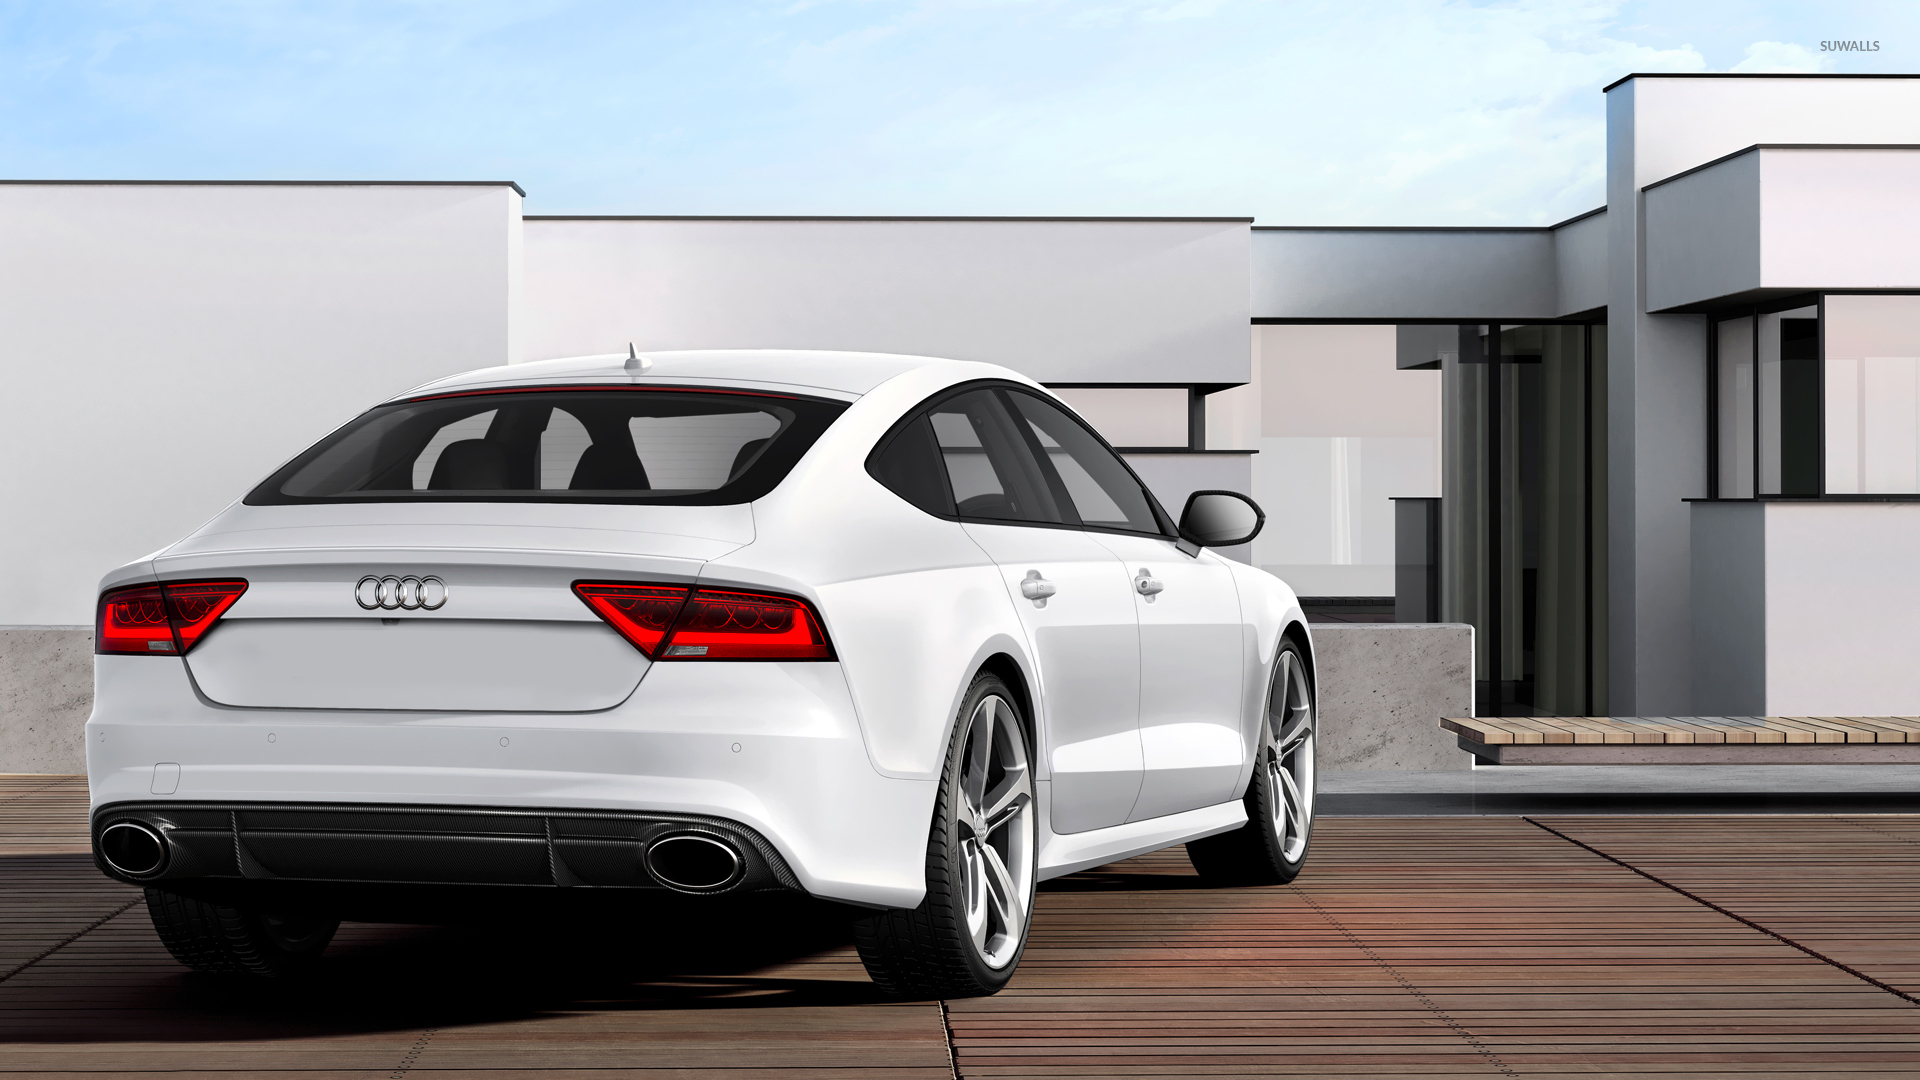 Back View Of A 2014 Audi Rs7 Sportback Wallpaper - Audi Rs7 Back Side , HD Wallpaper & Backgrounds